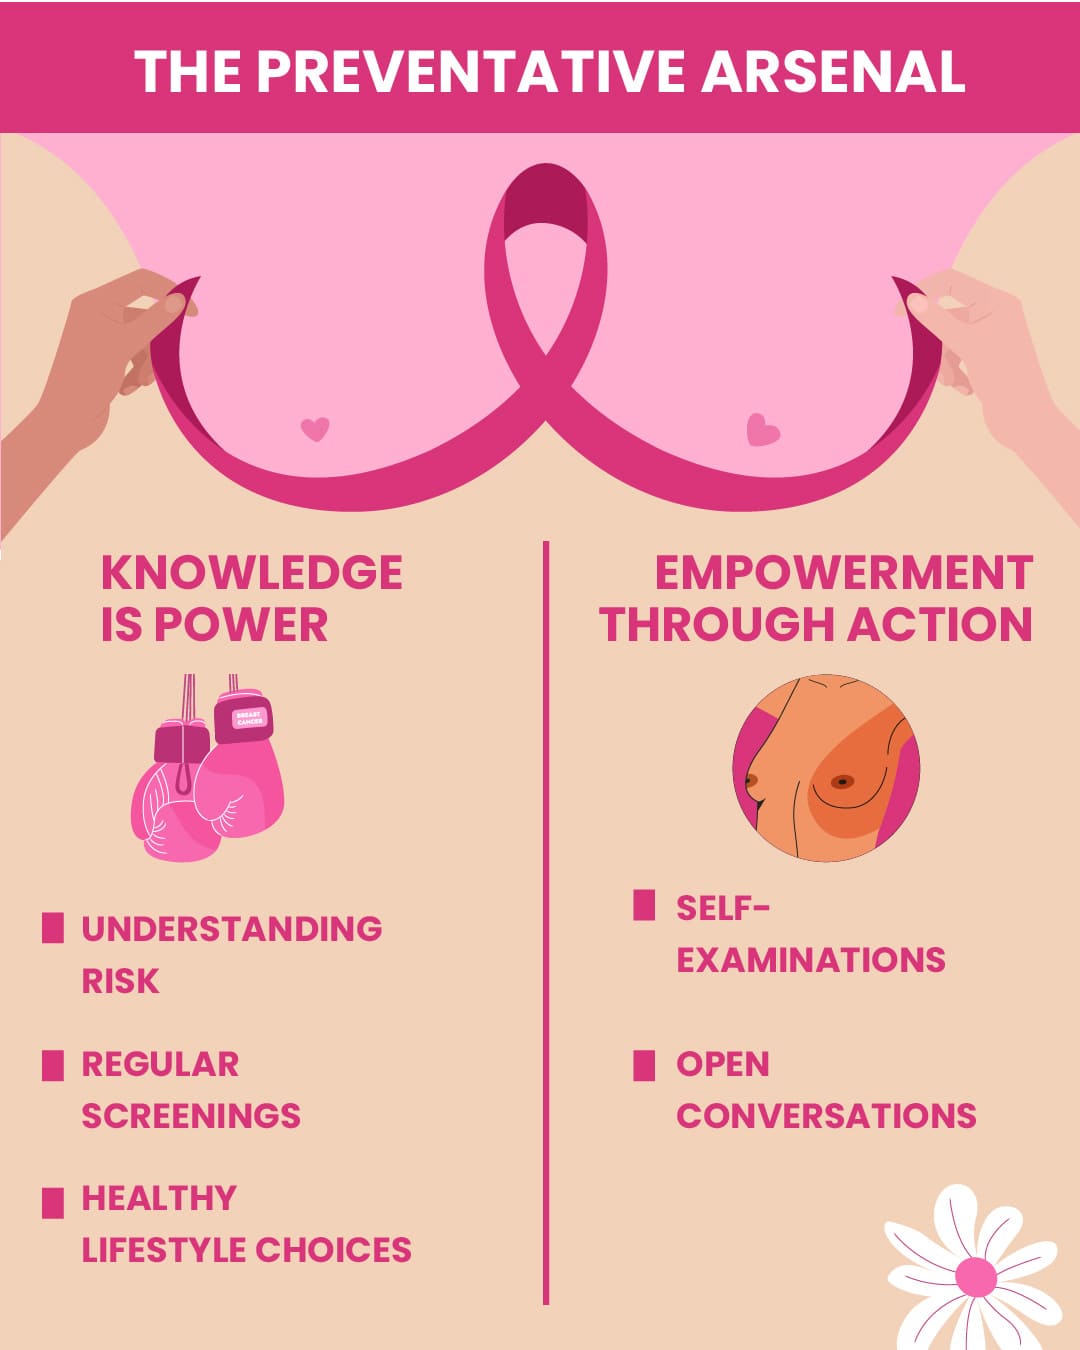 Illustrative image titled 'The Preventative Arsenal' showcasing two columns of preventative measures against breast cancer under 'Knowledge is Power' and 'Empowerment Through Action'